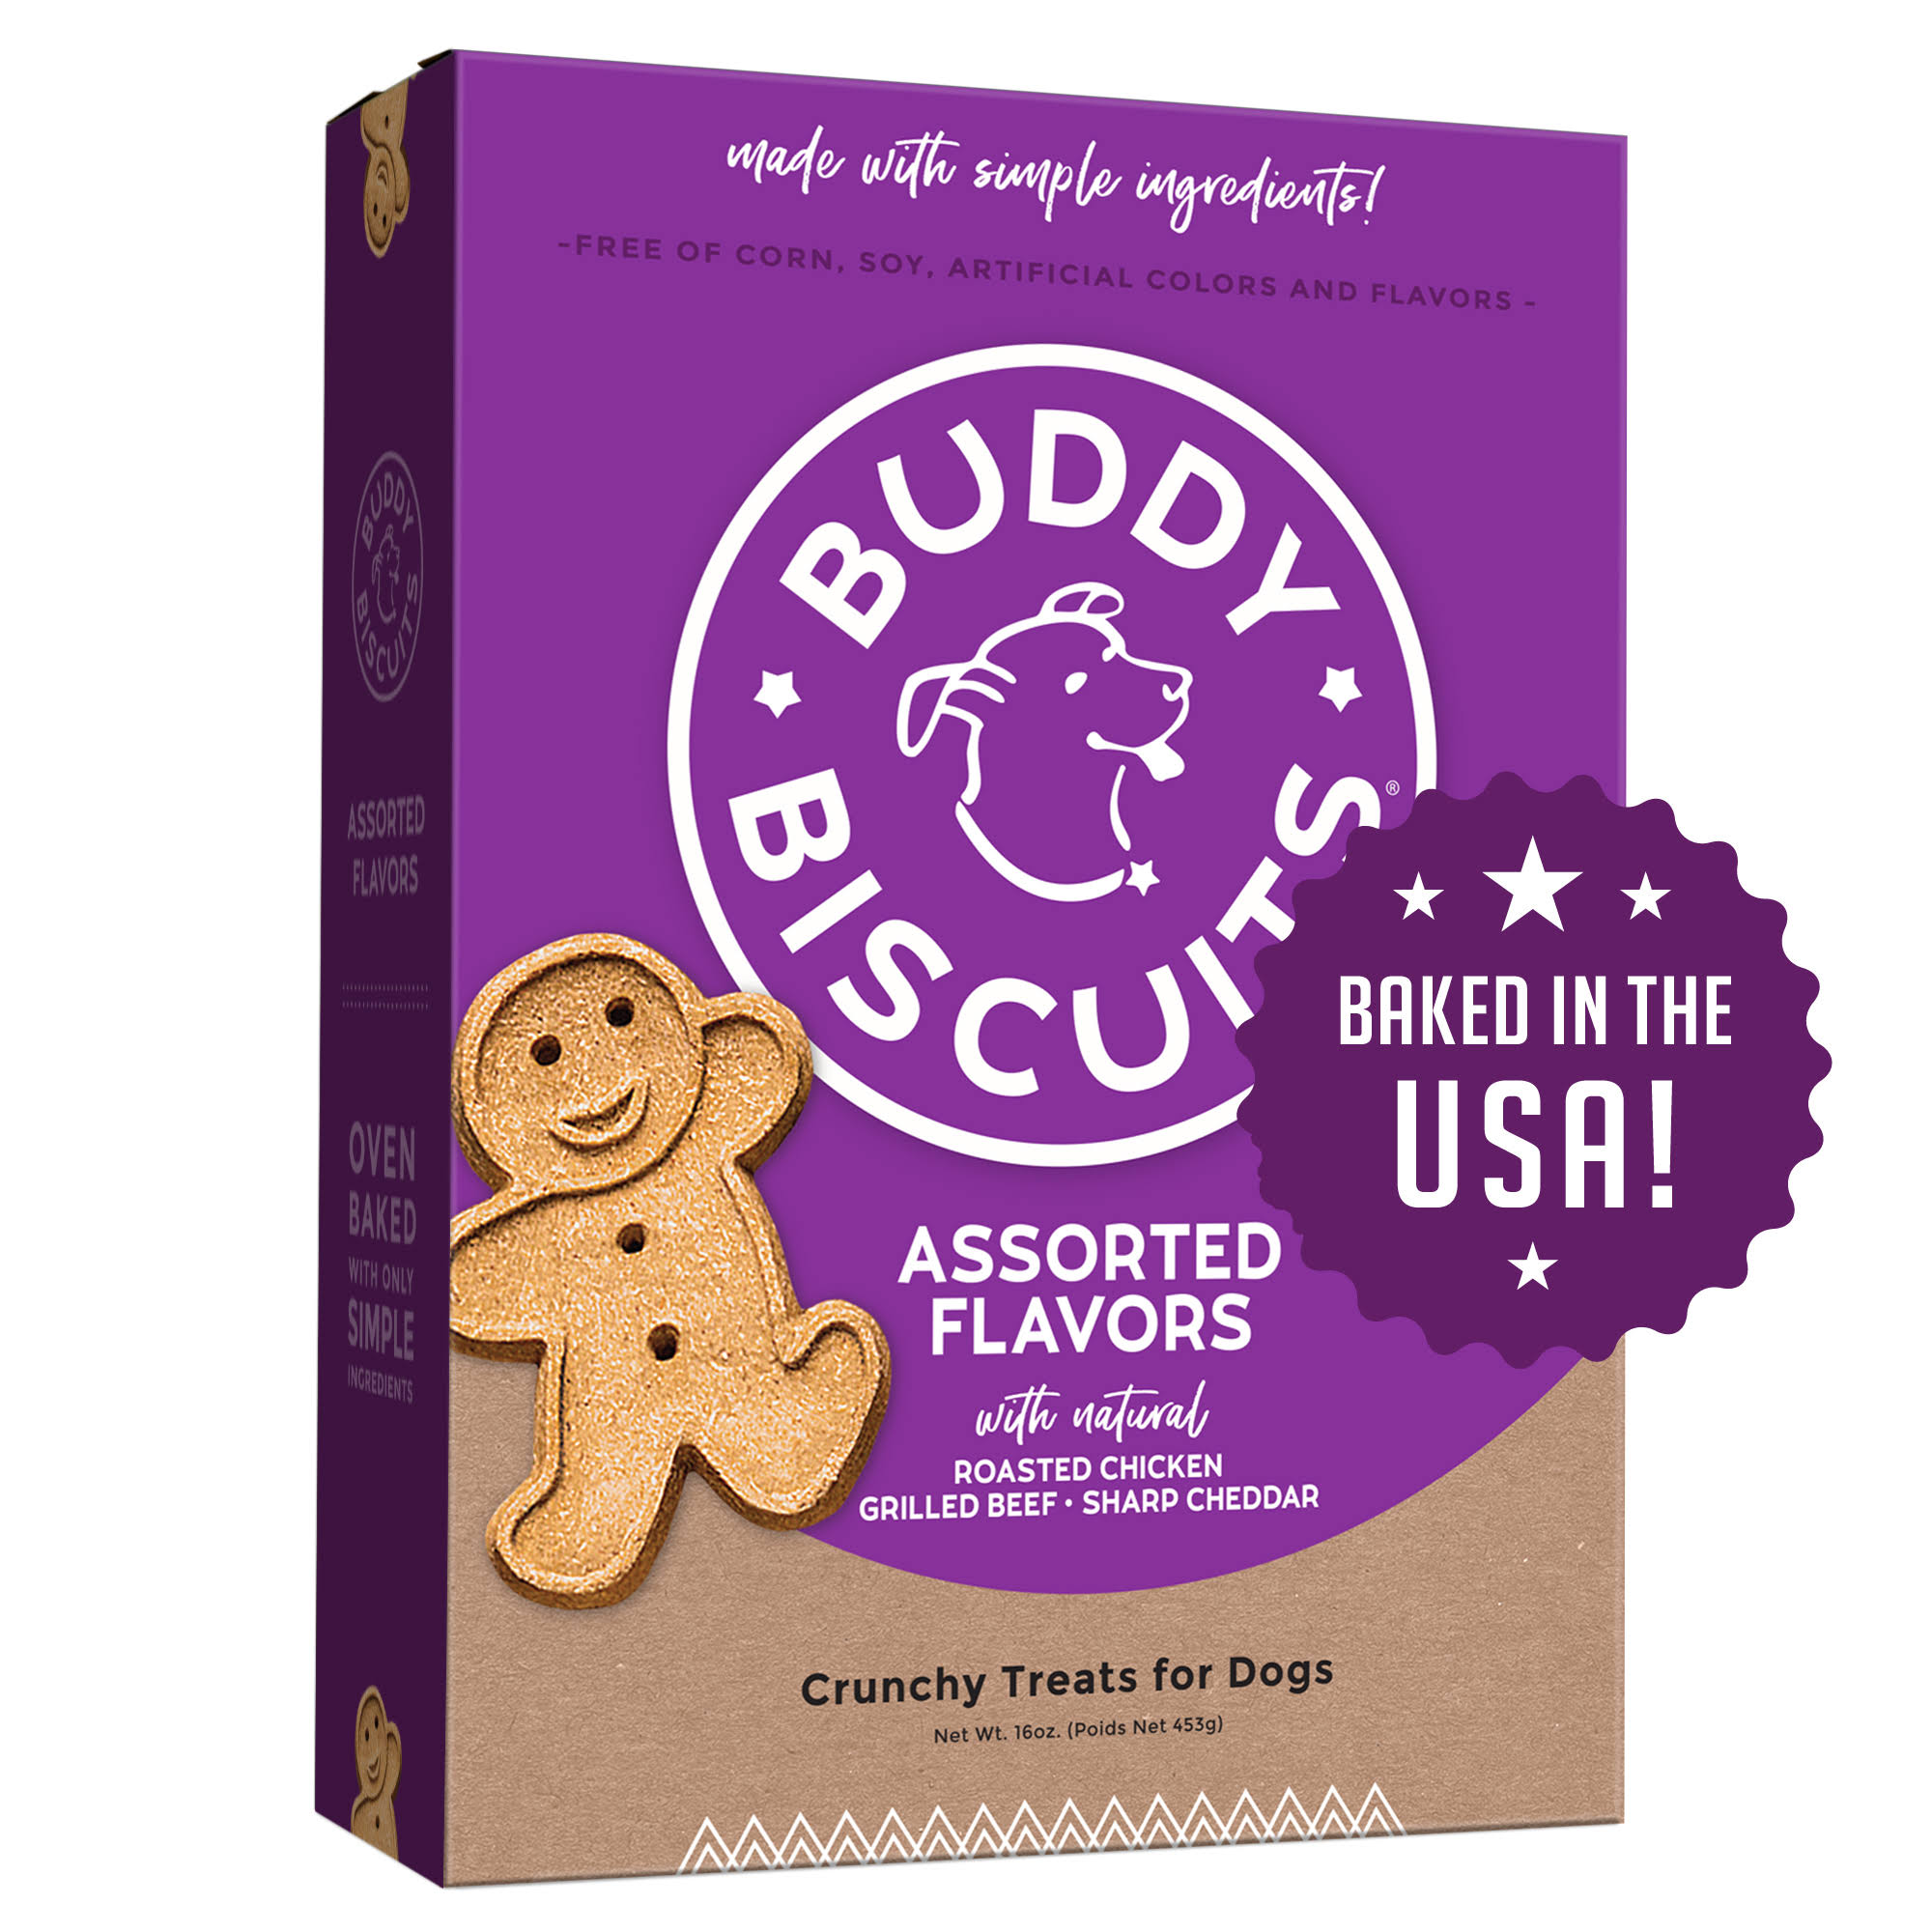 Buddy Biscuits Dog Treats, Crunchy, Assorted Flavors - 16 oz